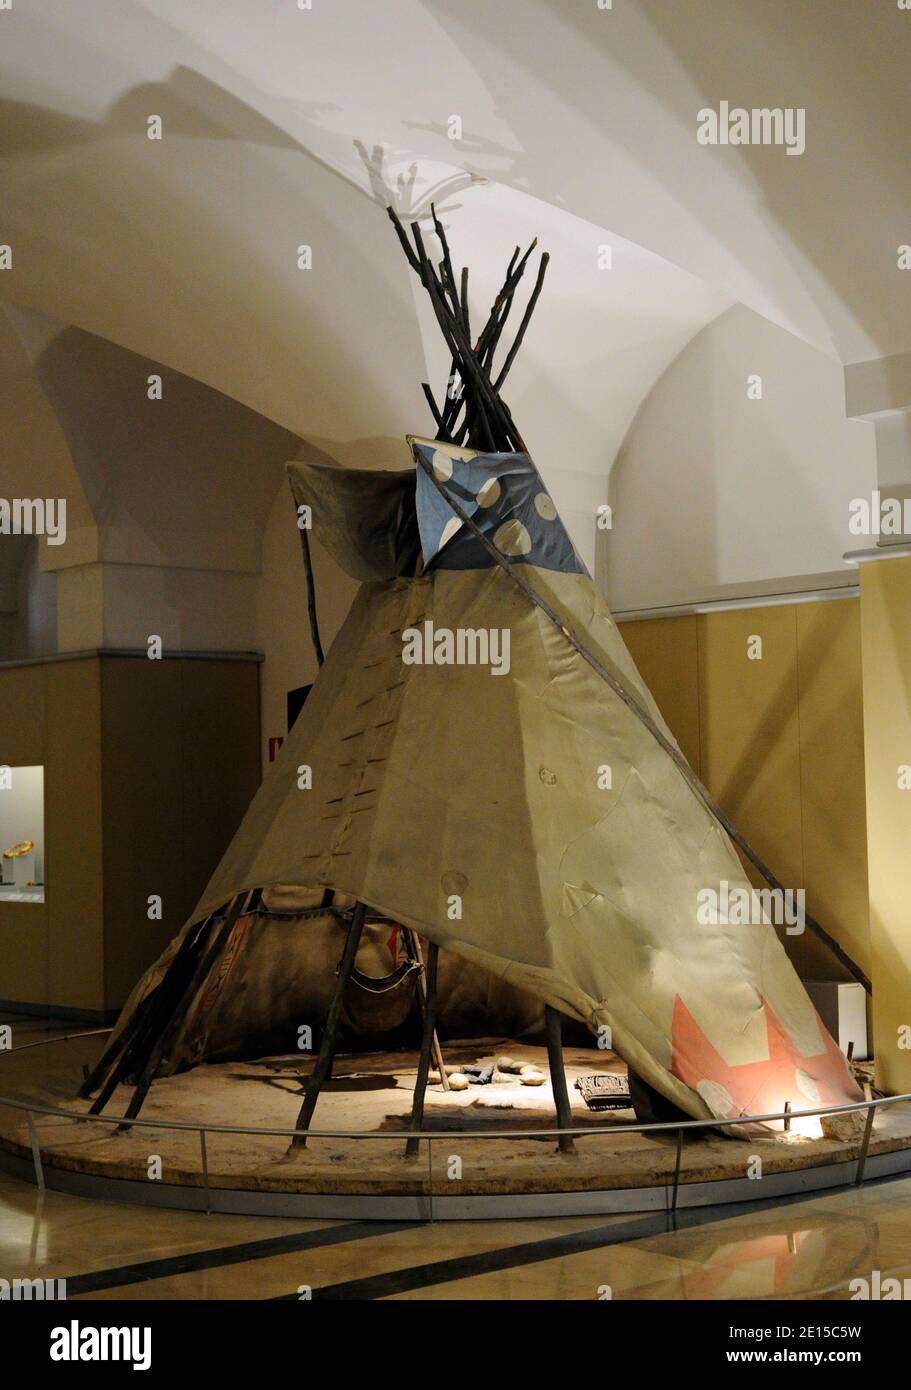 Tipi (tepee). Conical tent made of animal skins upon wooden poles. Used by indigenous peoples of the Great Plains of North America. Museum of the Americas. Madrid, Spain. Stock Photo